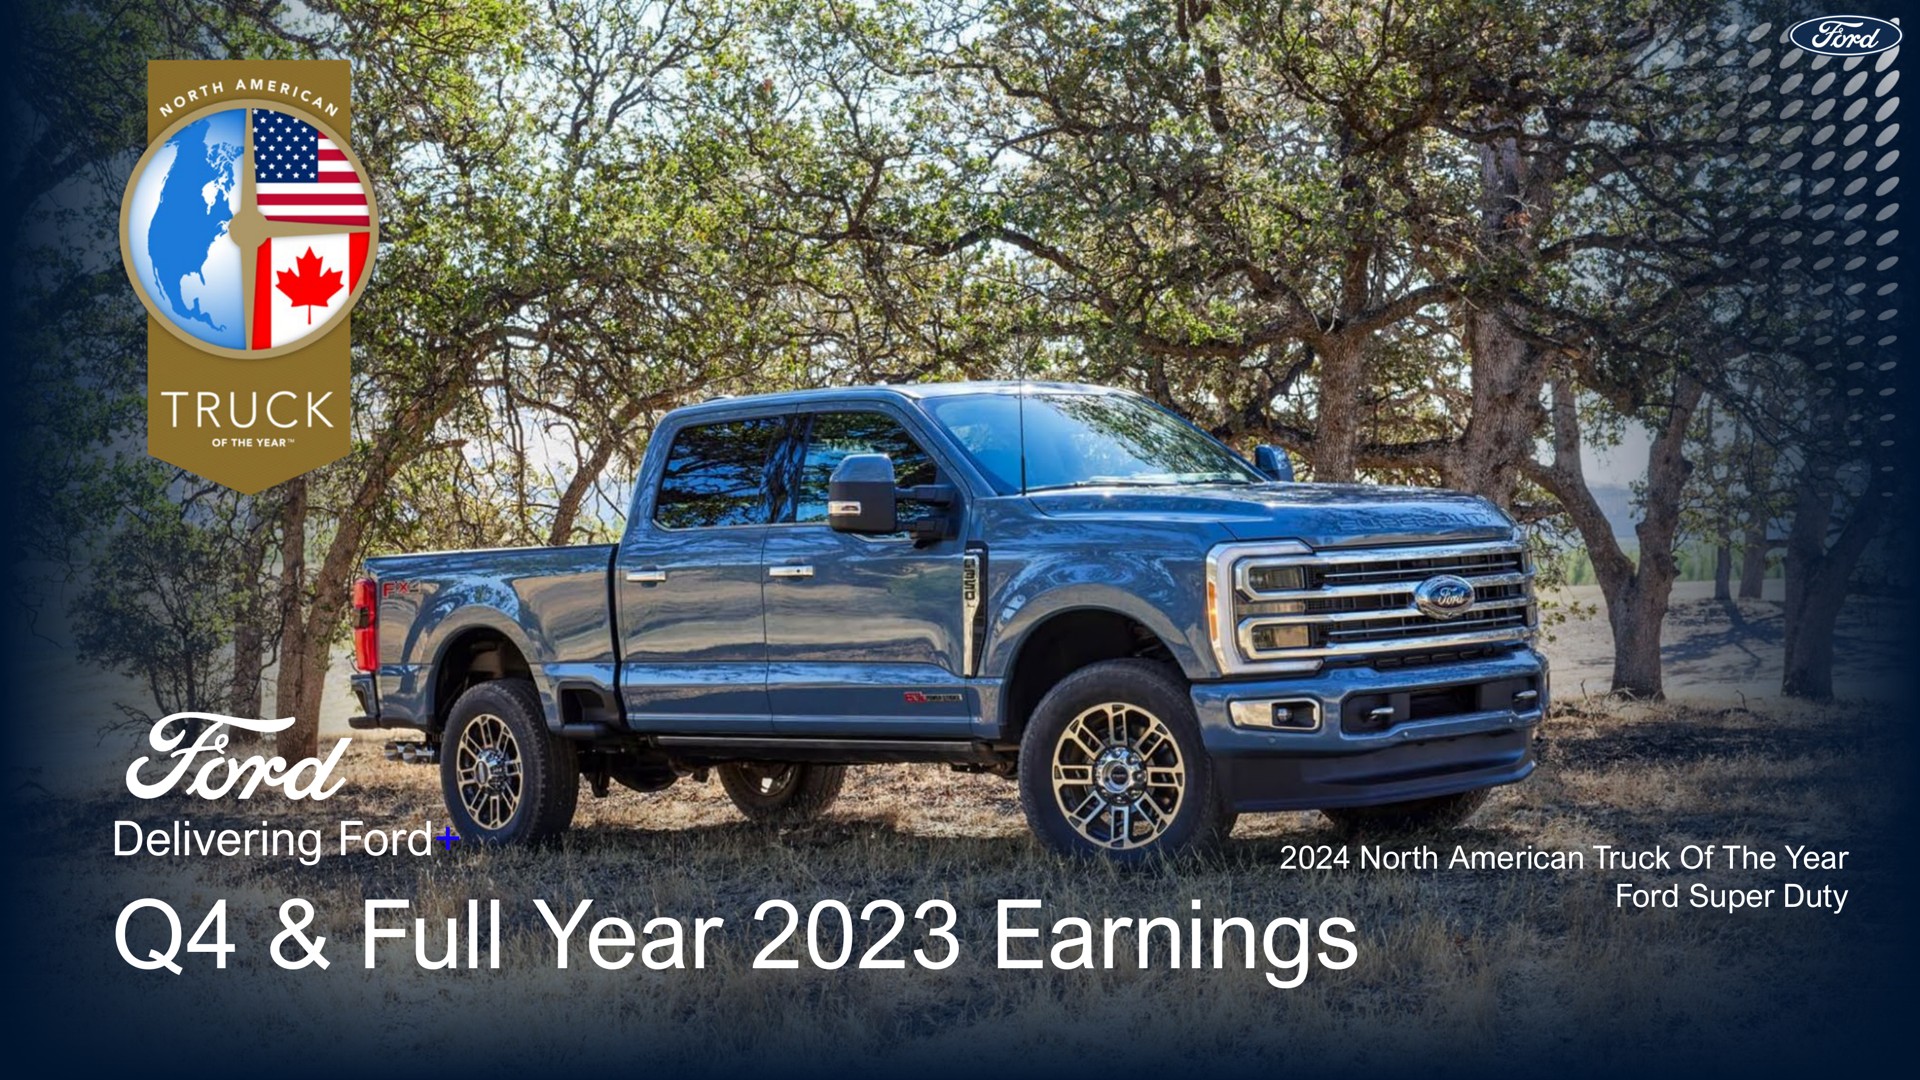 delivering ford full year earnings a delivering ford | Ford